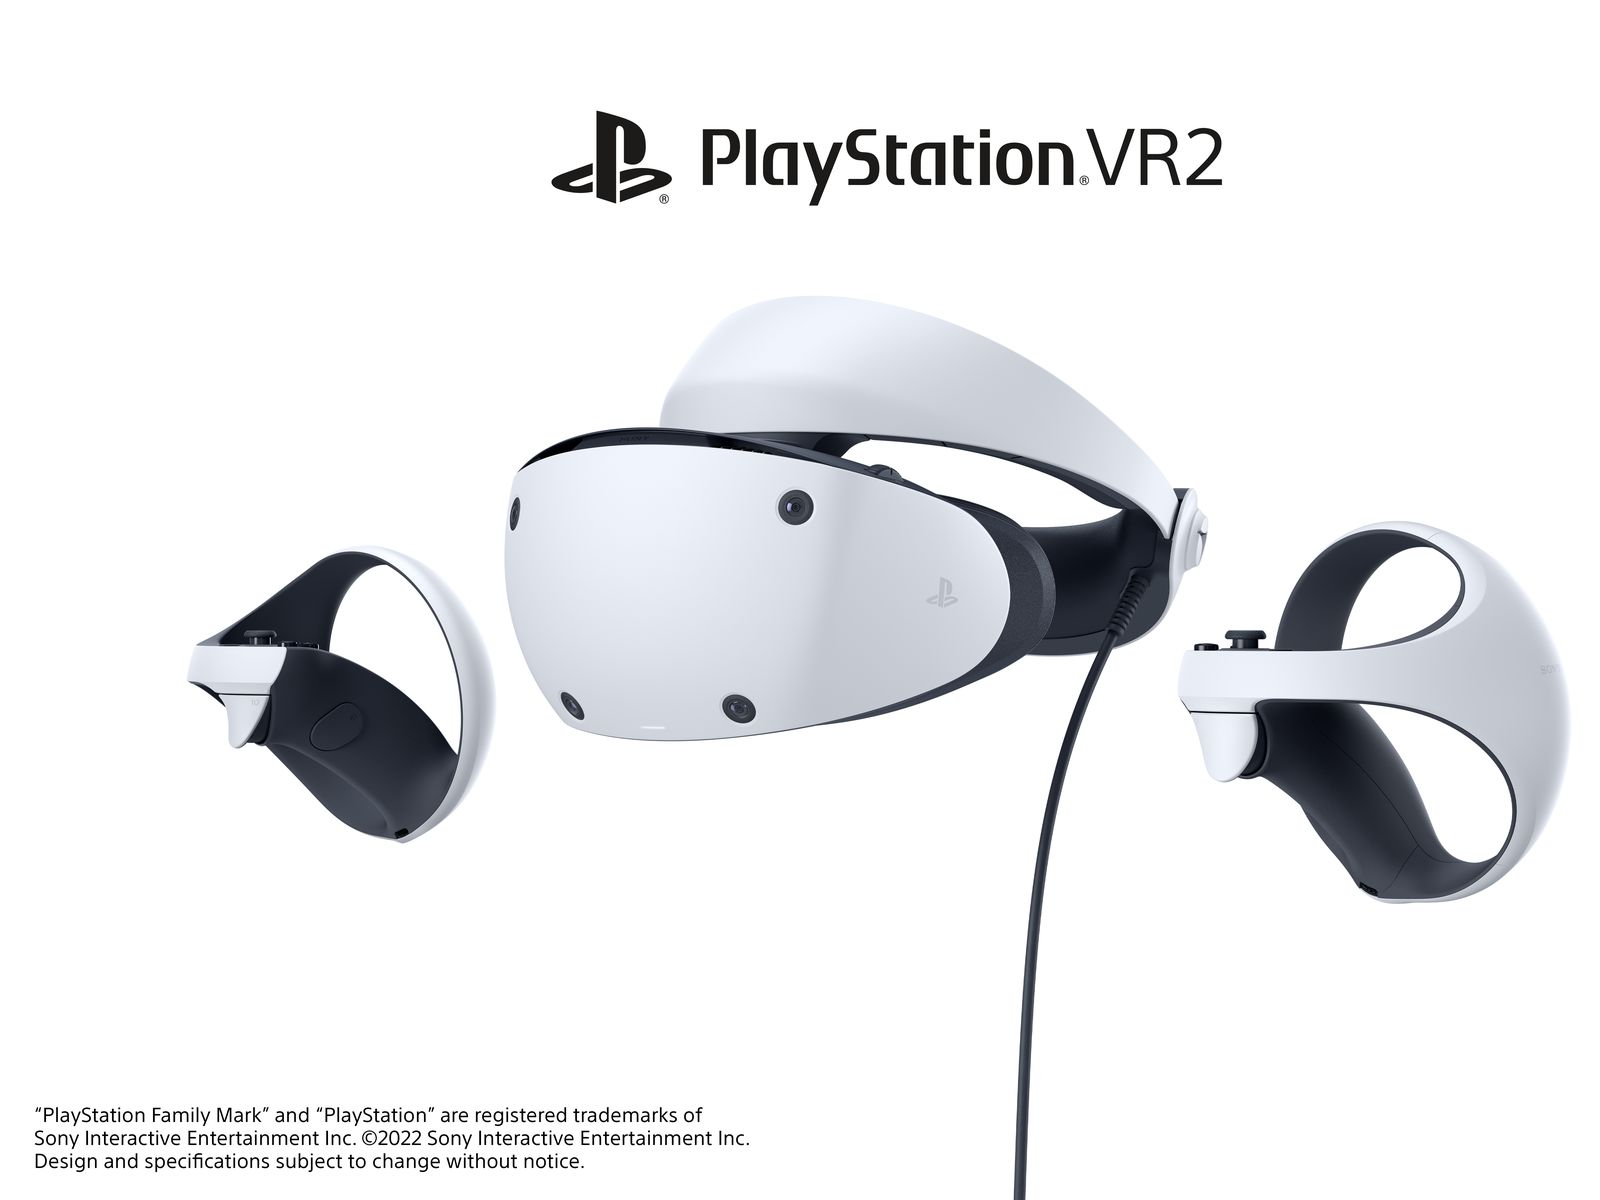 Sony Announces PlayStation VR2 for the PS5 and Horizon VR Game